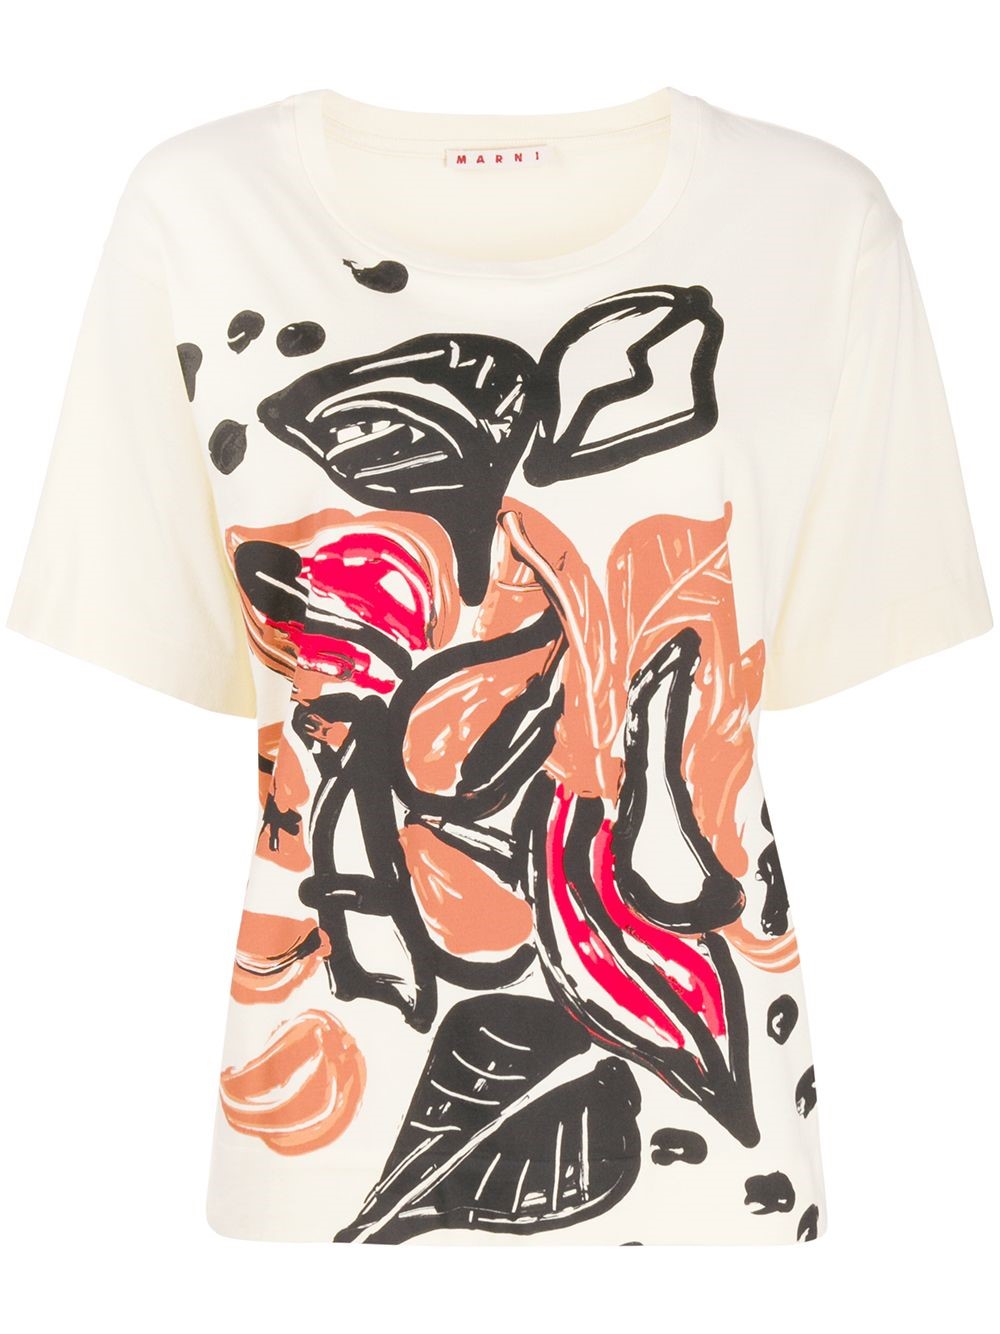 marni T-SHIRT available on montiboutique.com - 32110